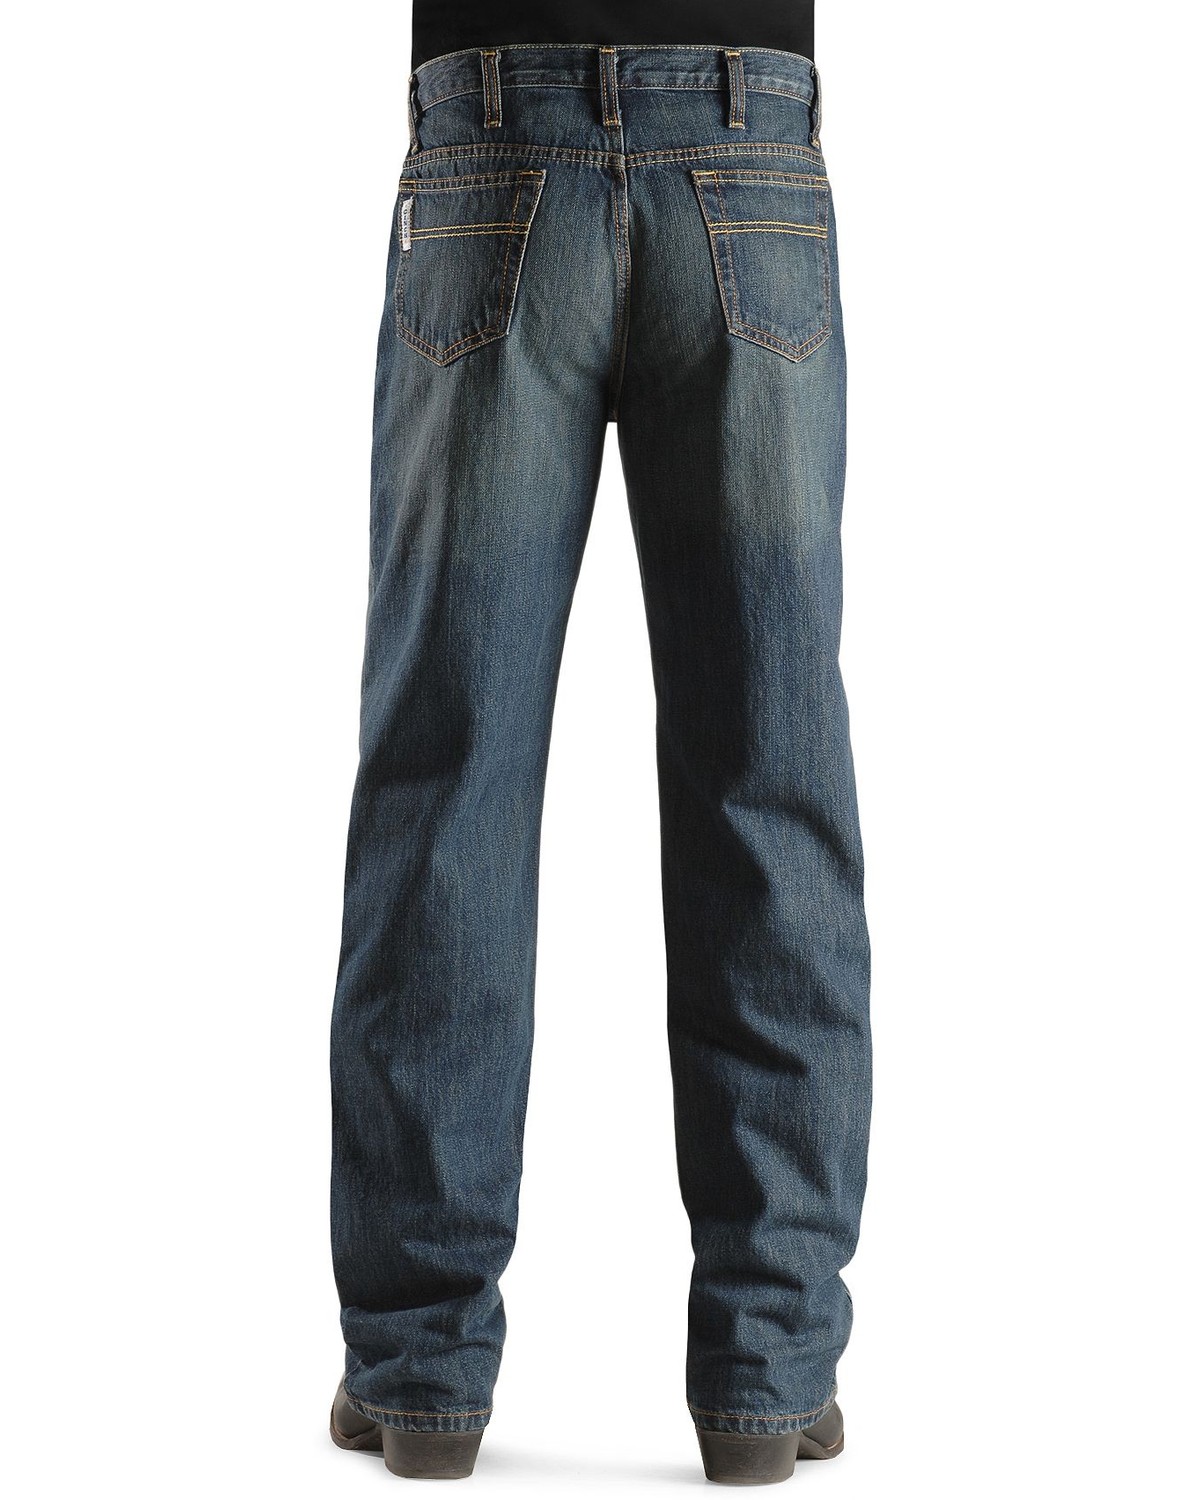 Cinch Jeans - White Label Relaxed Fit Denim Jeans Dark Stonewash | Sheplers